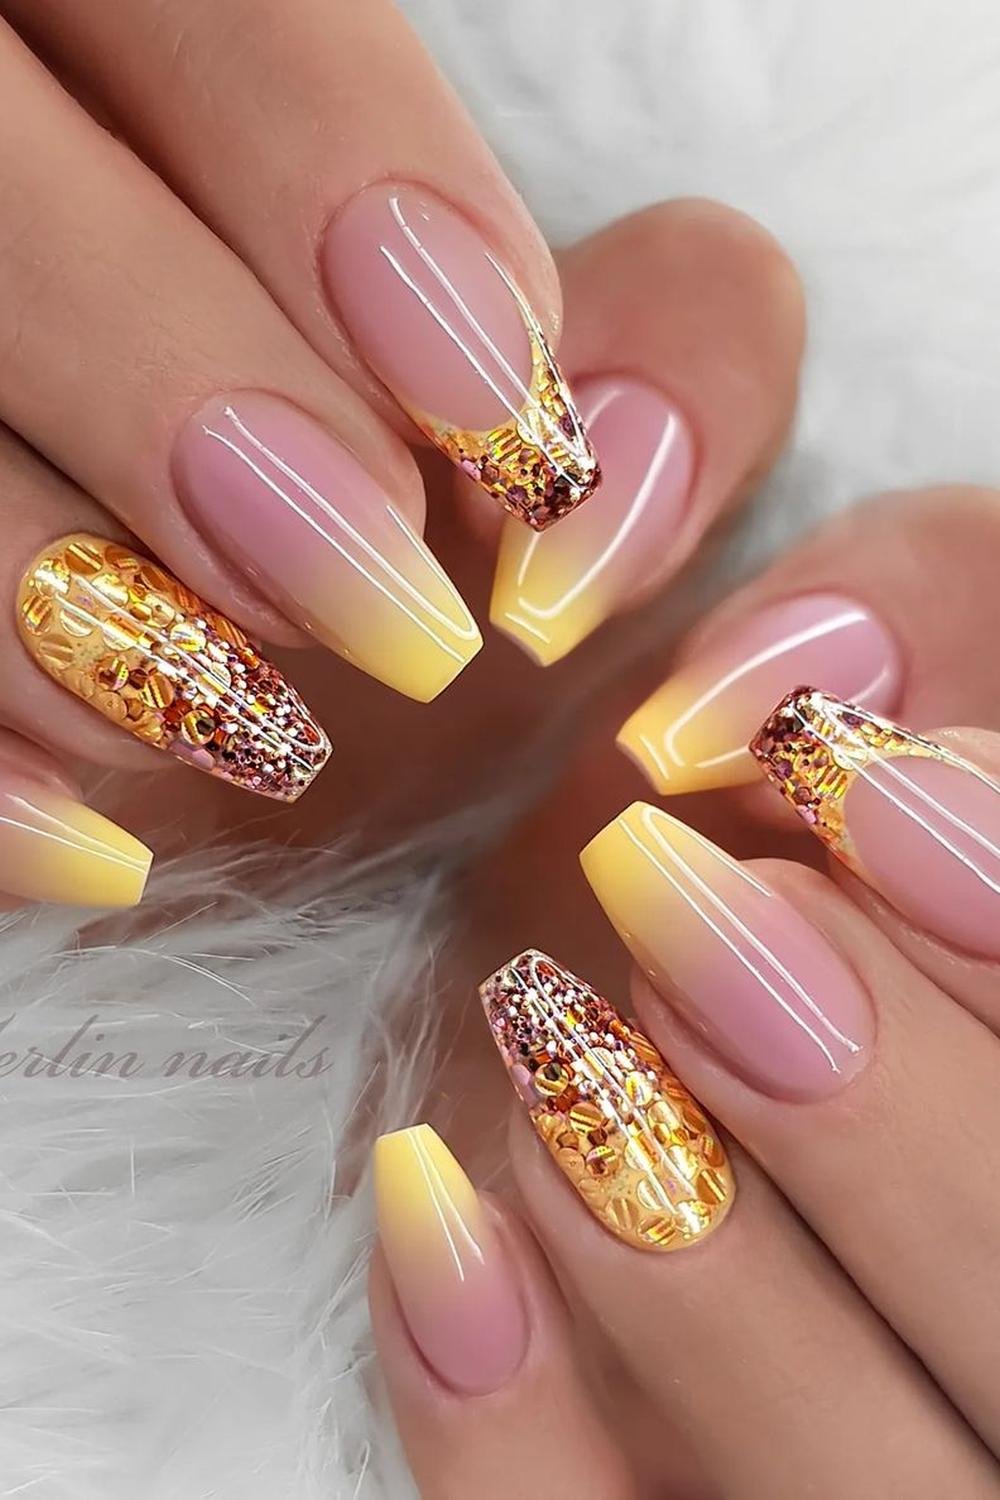 28 - Picture of Ballerina Nails